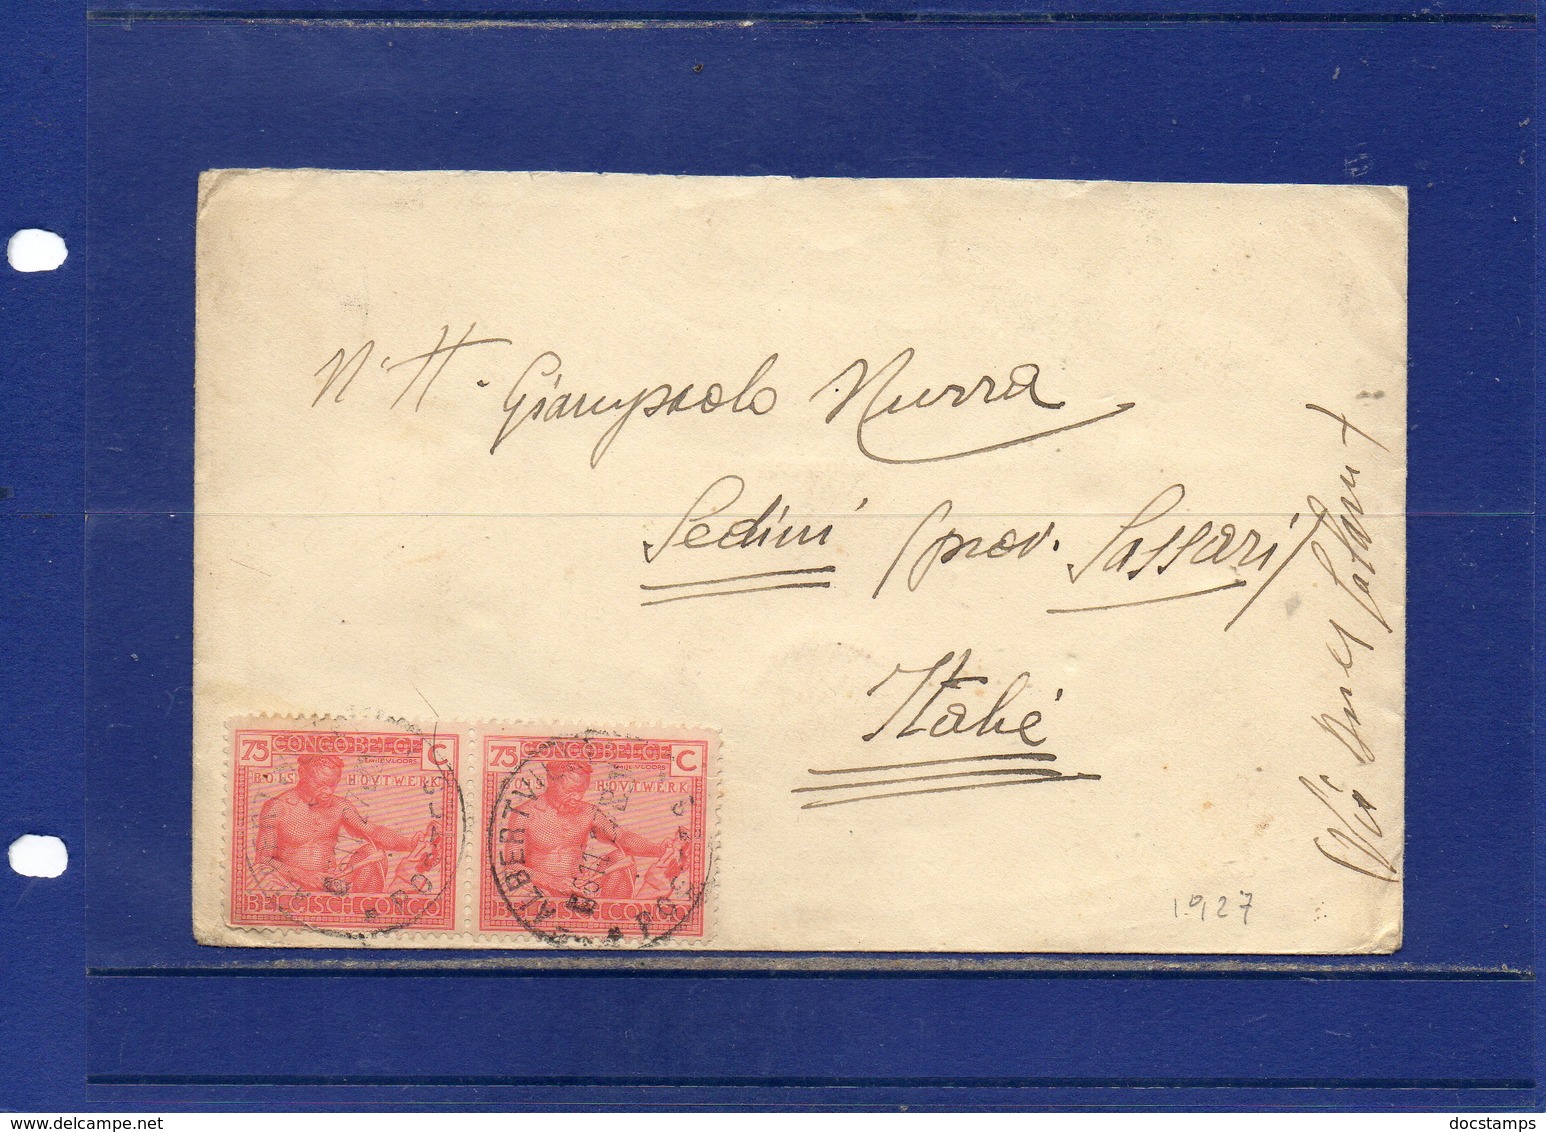 ##(ROYBOX1)-Postal History-Belgian Congo1927-Cover From Albertville To Sedini-Sassari Italy, Stamps Affixed On Back - Covers & Documents